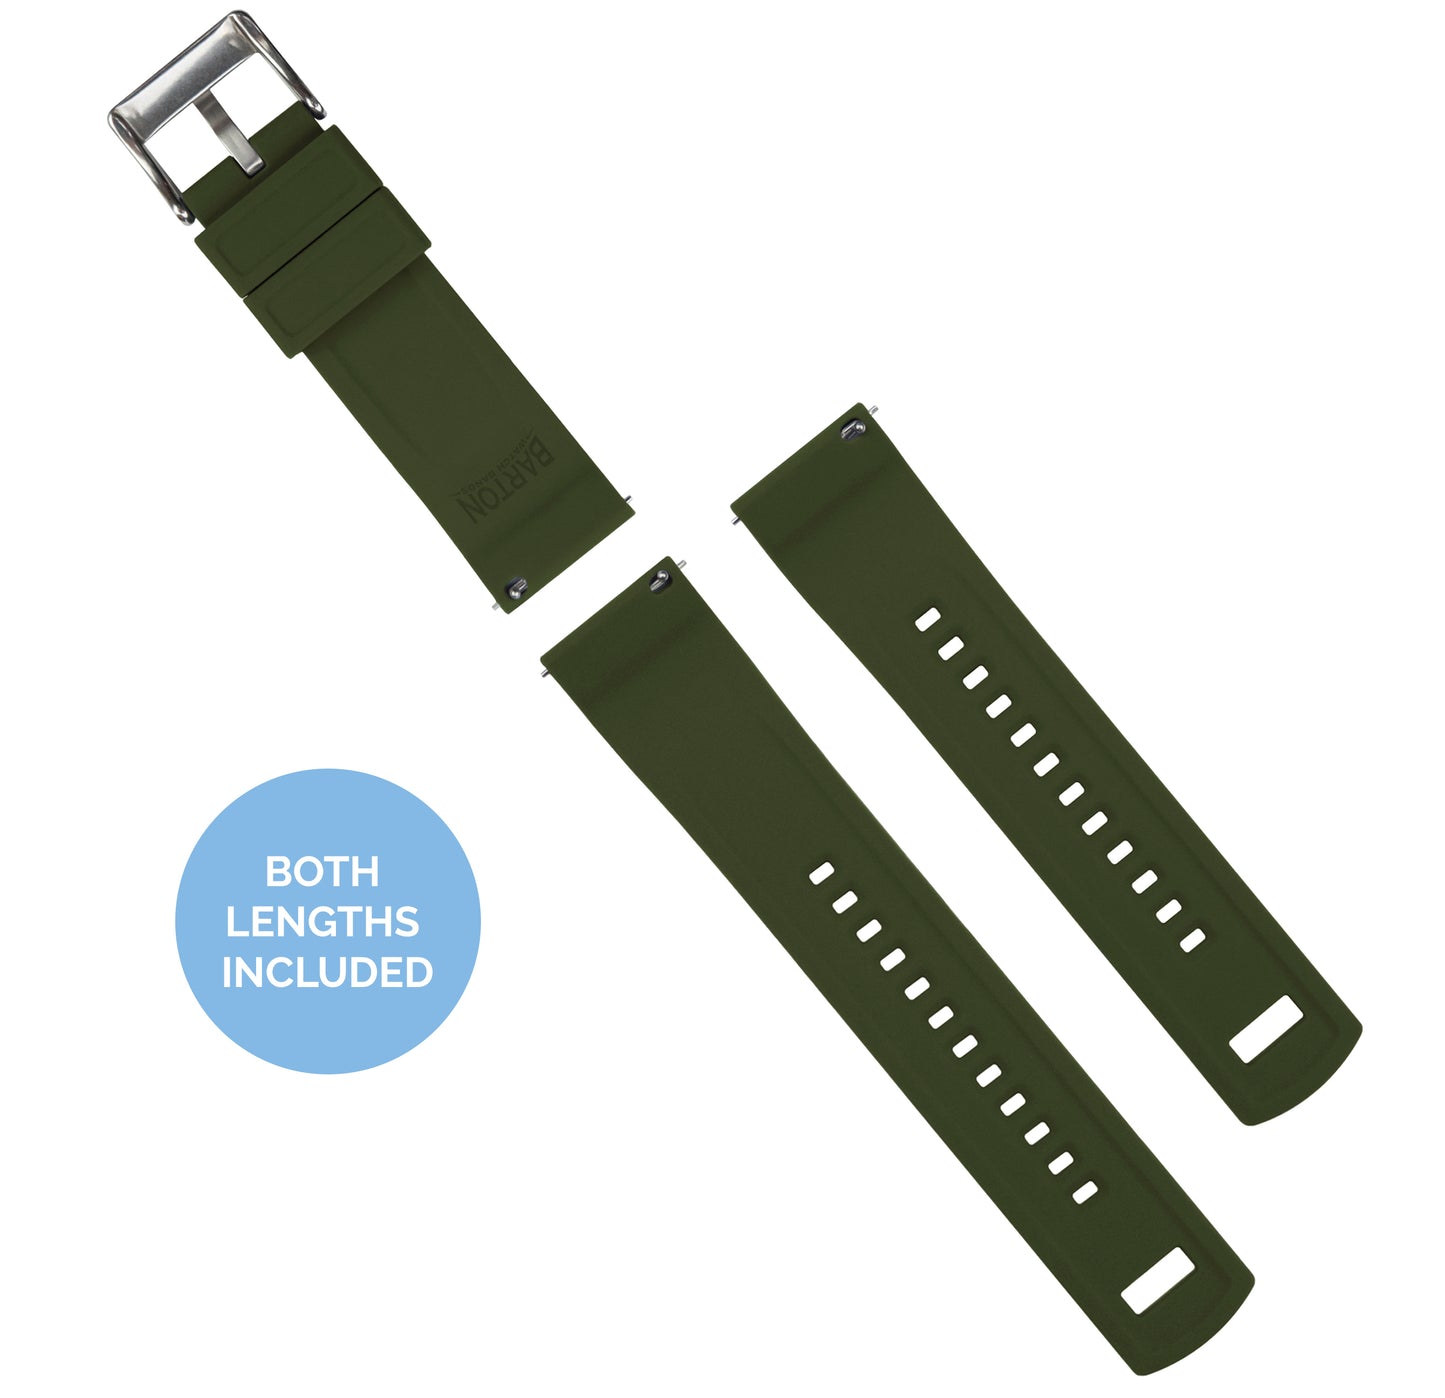 Fossil Sport | Elite Silicone | Black Top / Army Green Bottom - Barton Watch Bands